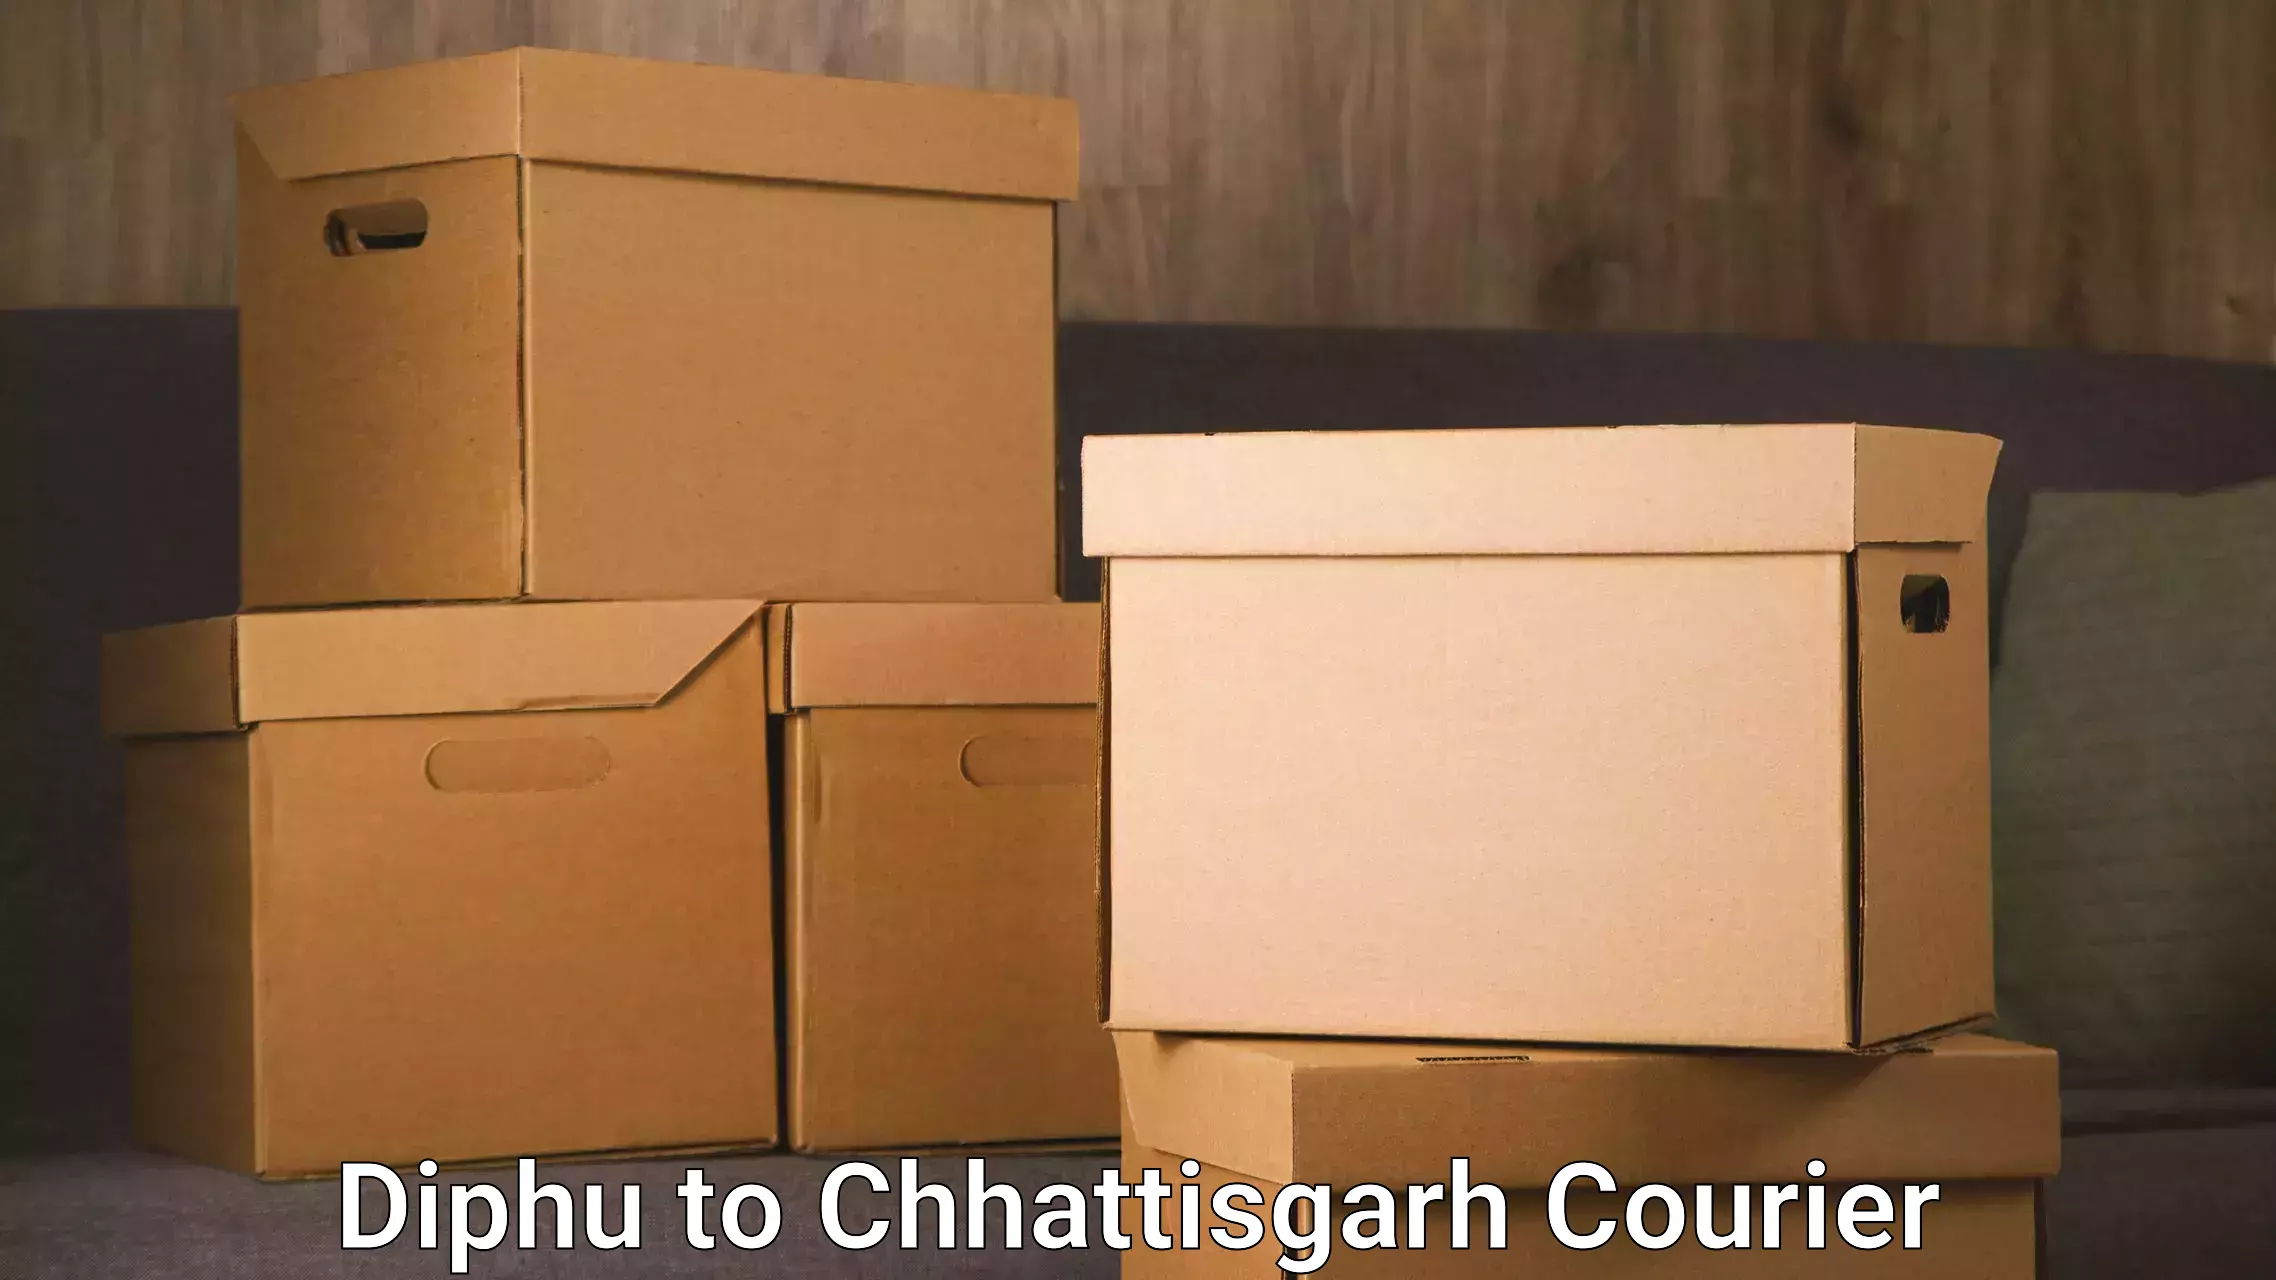 Speedy delivery service Diphu to IIT Bhilai